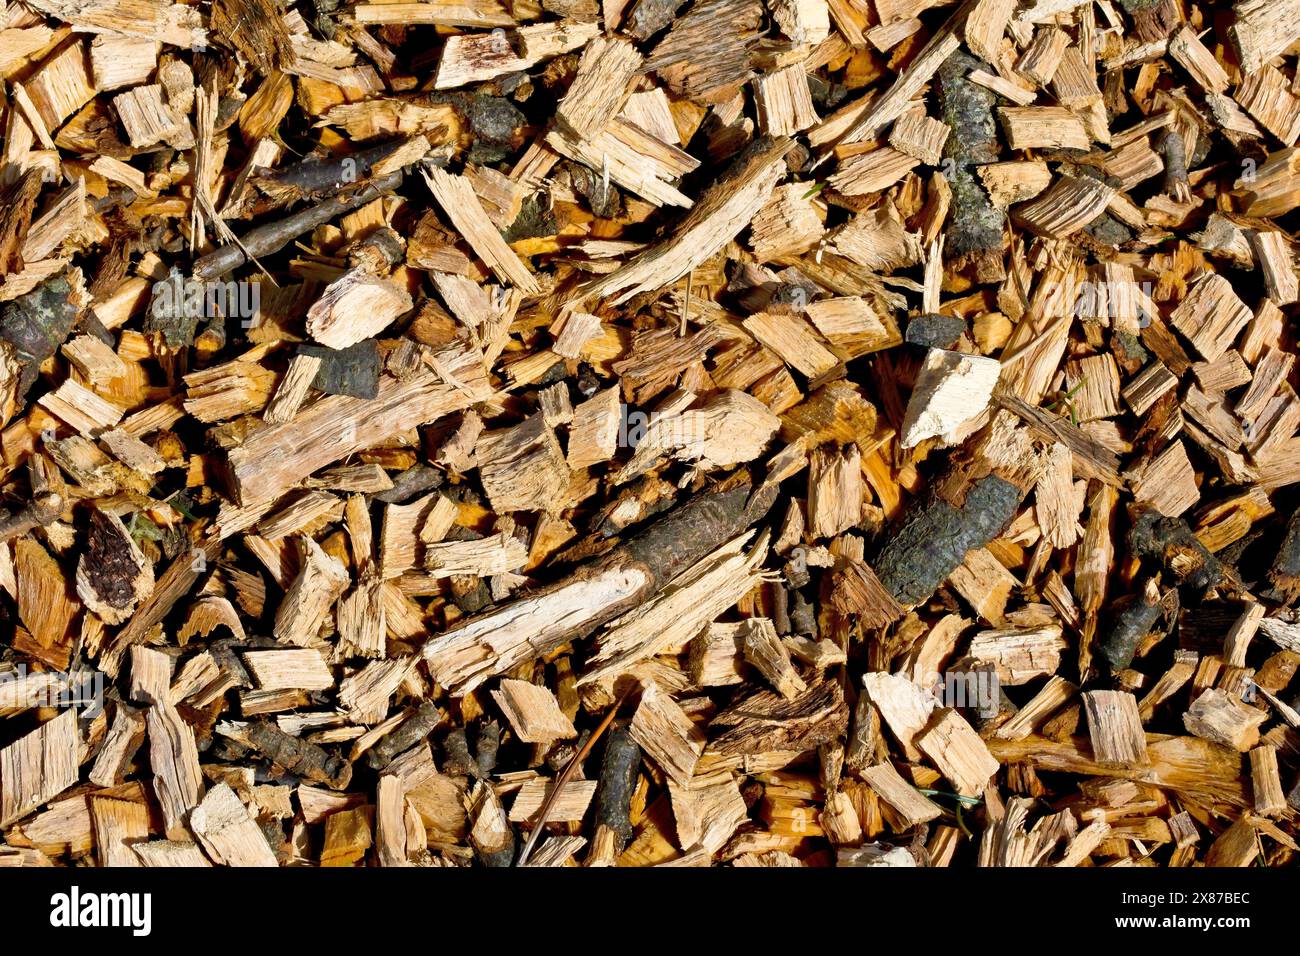 Close up of a mass of wood chips or chippings left behind on a woodland floor after work to remove a fallen tree. Stock Photo